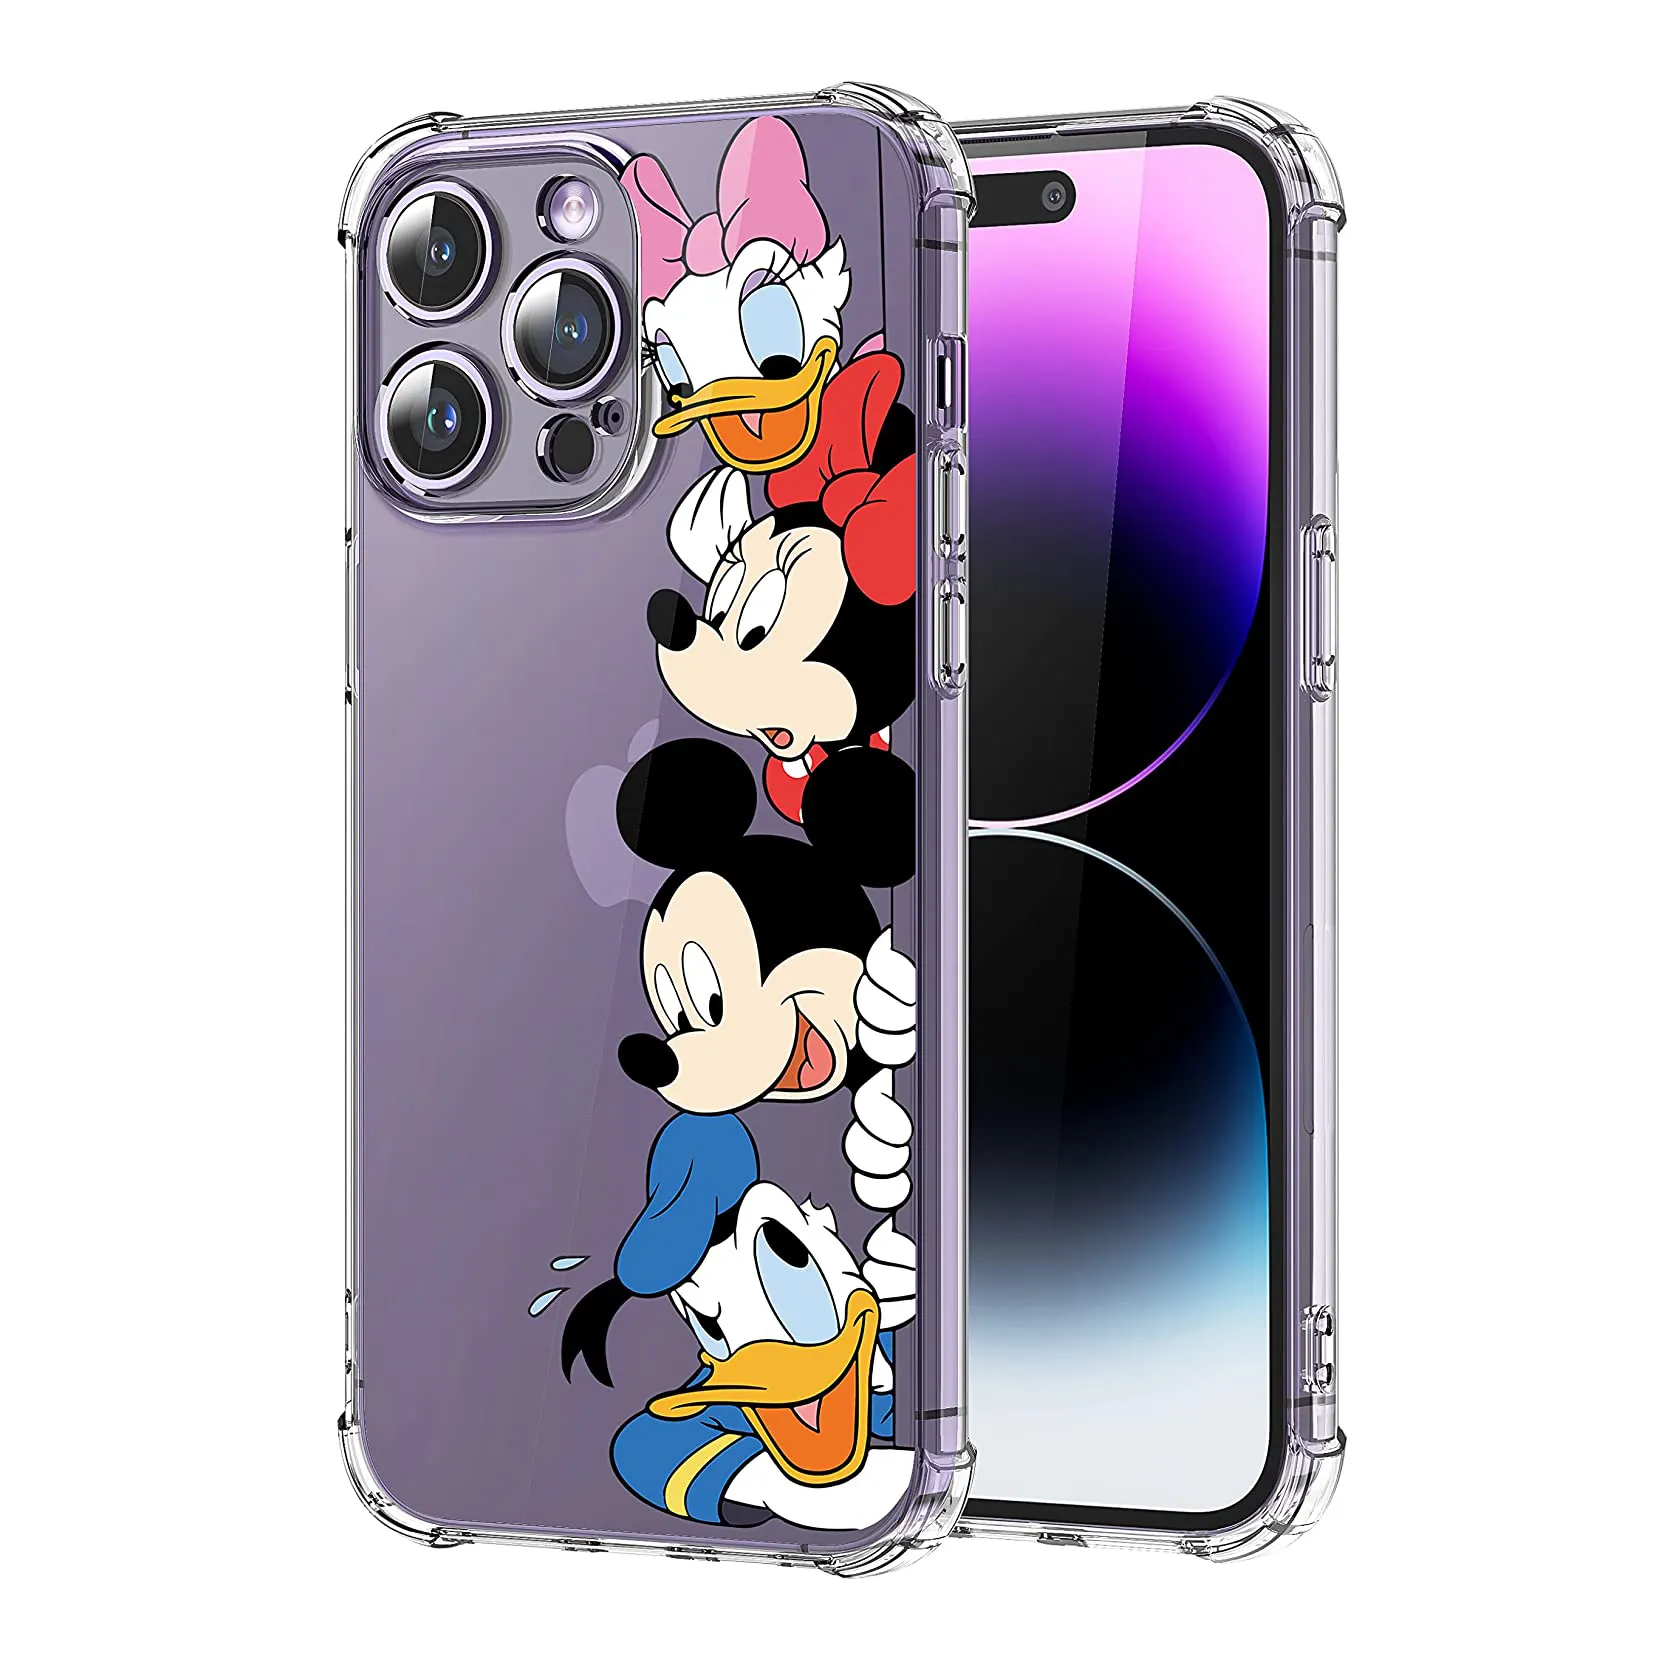 Silicone Cellphone Cover Cartoon Lovely Dishini Design Anti-Shock IMD Phone Case for iPhone 13 12 14 1 Pro Max